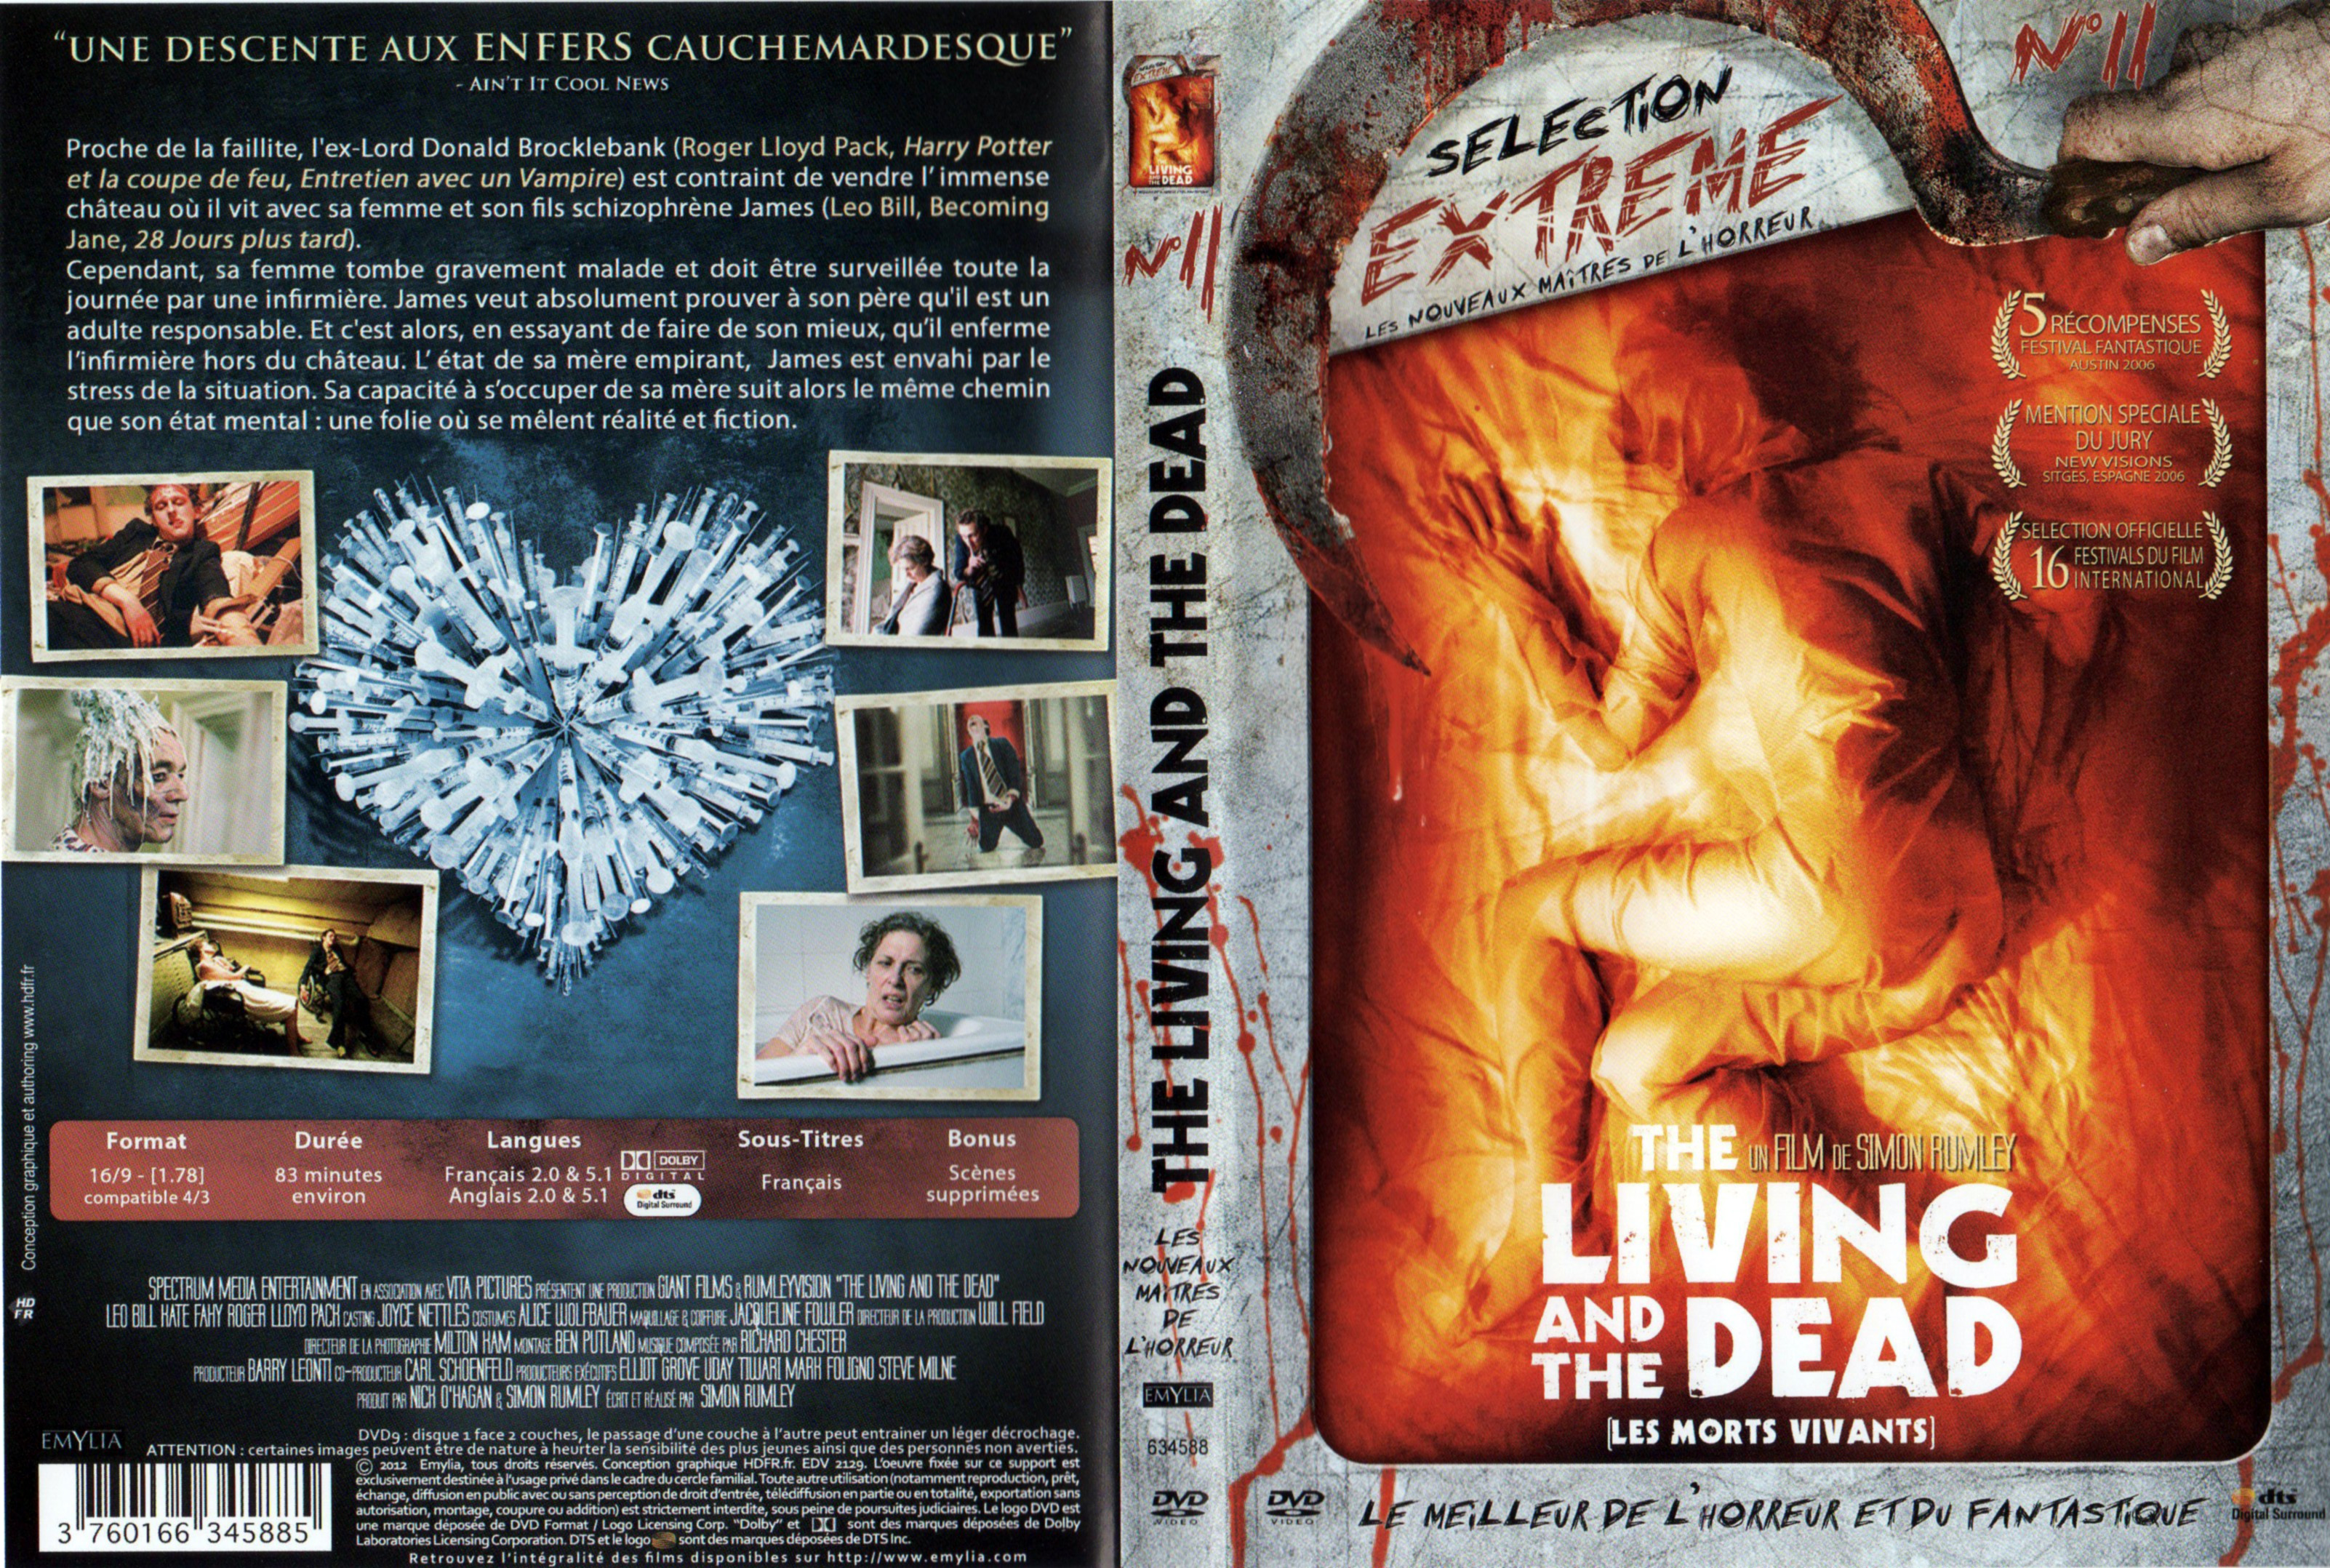 Jaquette DVD The living and the dead v2